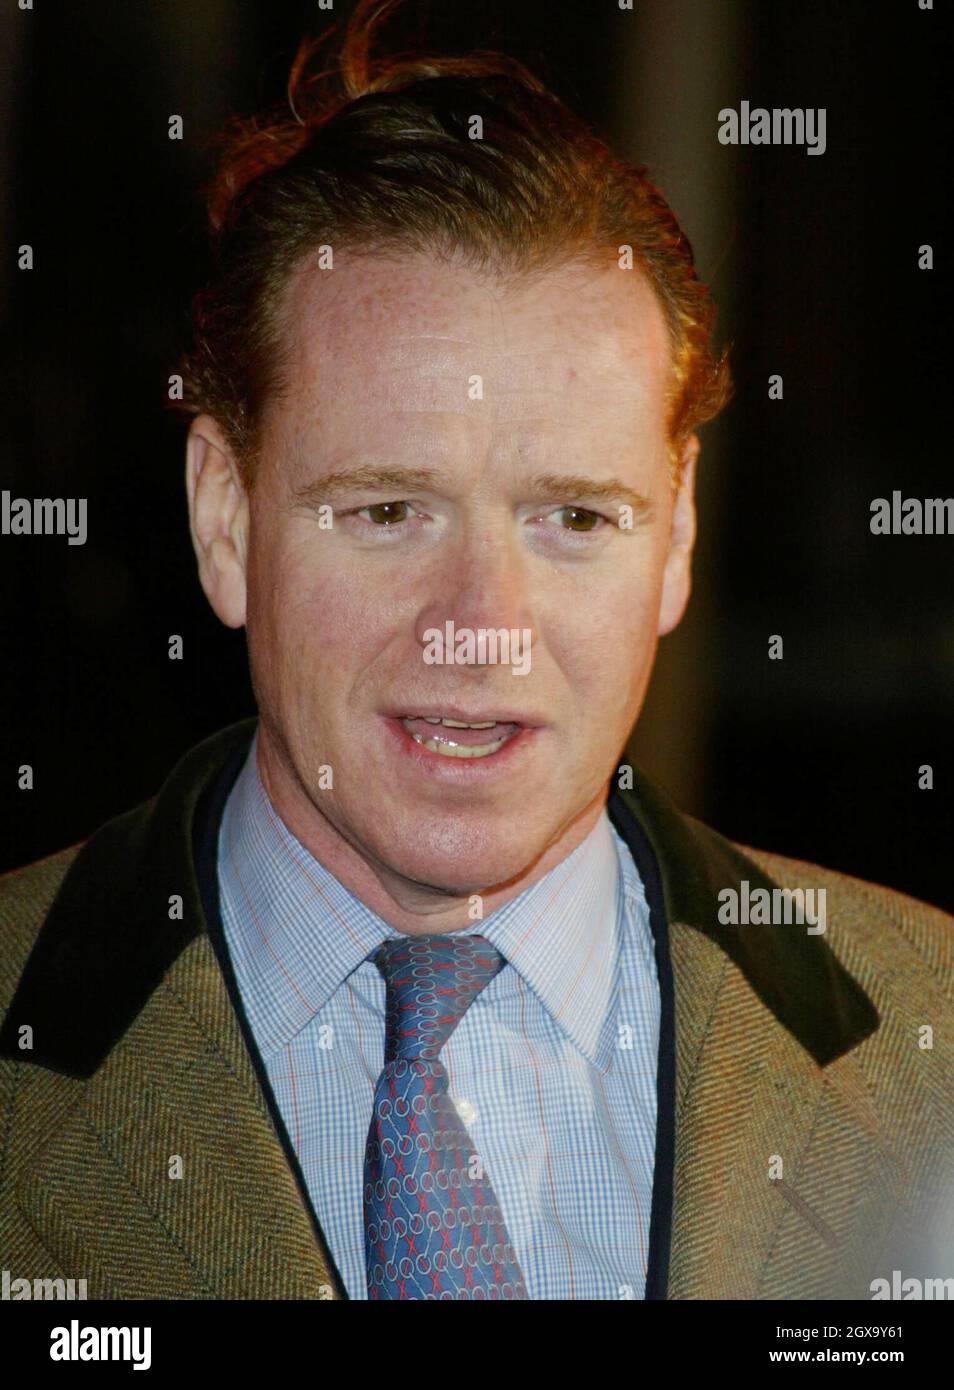 James Hewitt at BBC TV moments of 2003 which took place at the BBC studios. James was an ex boyfriend of the late Princess Diana. Stock Photo